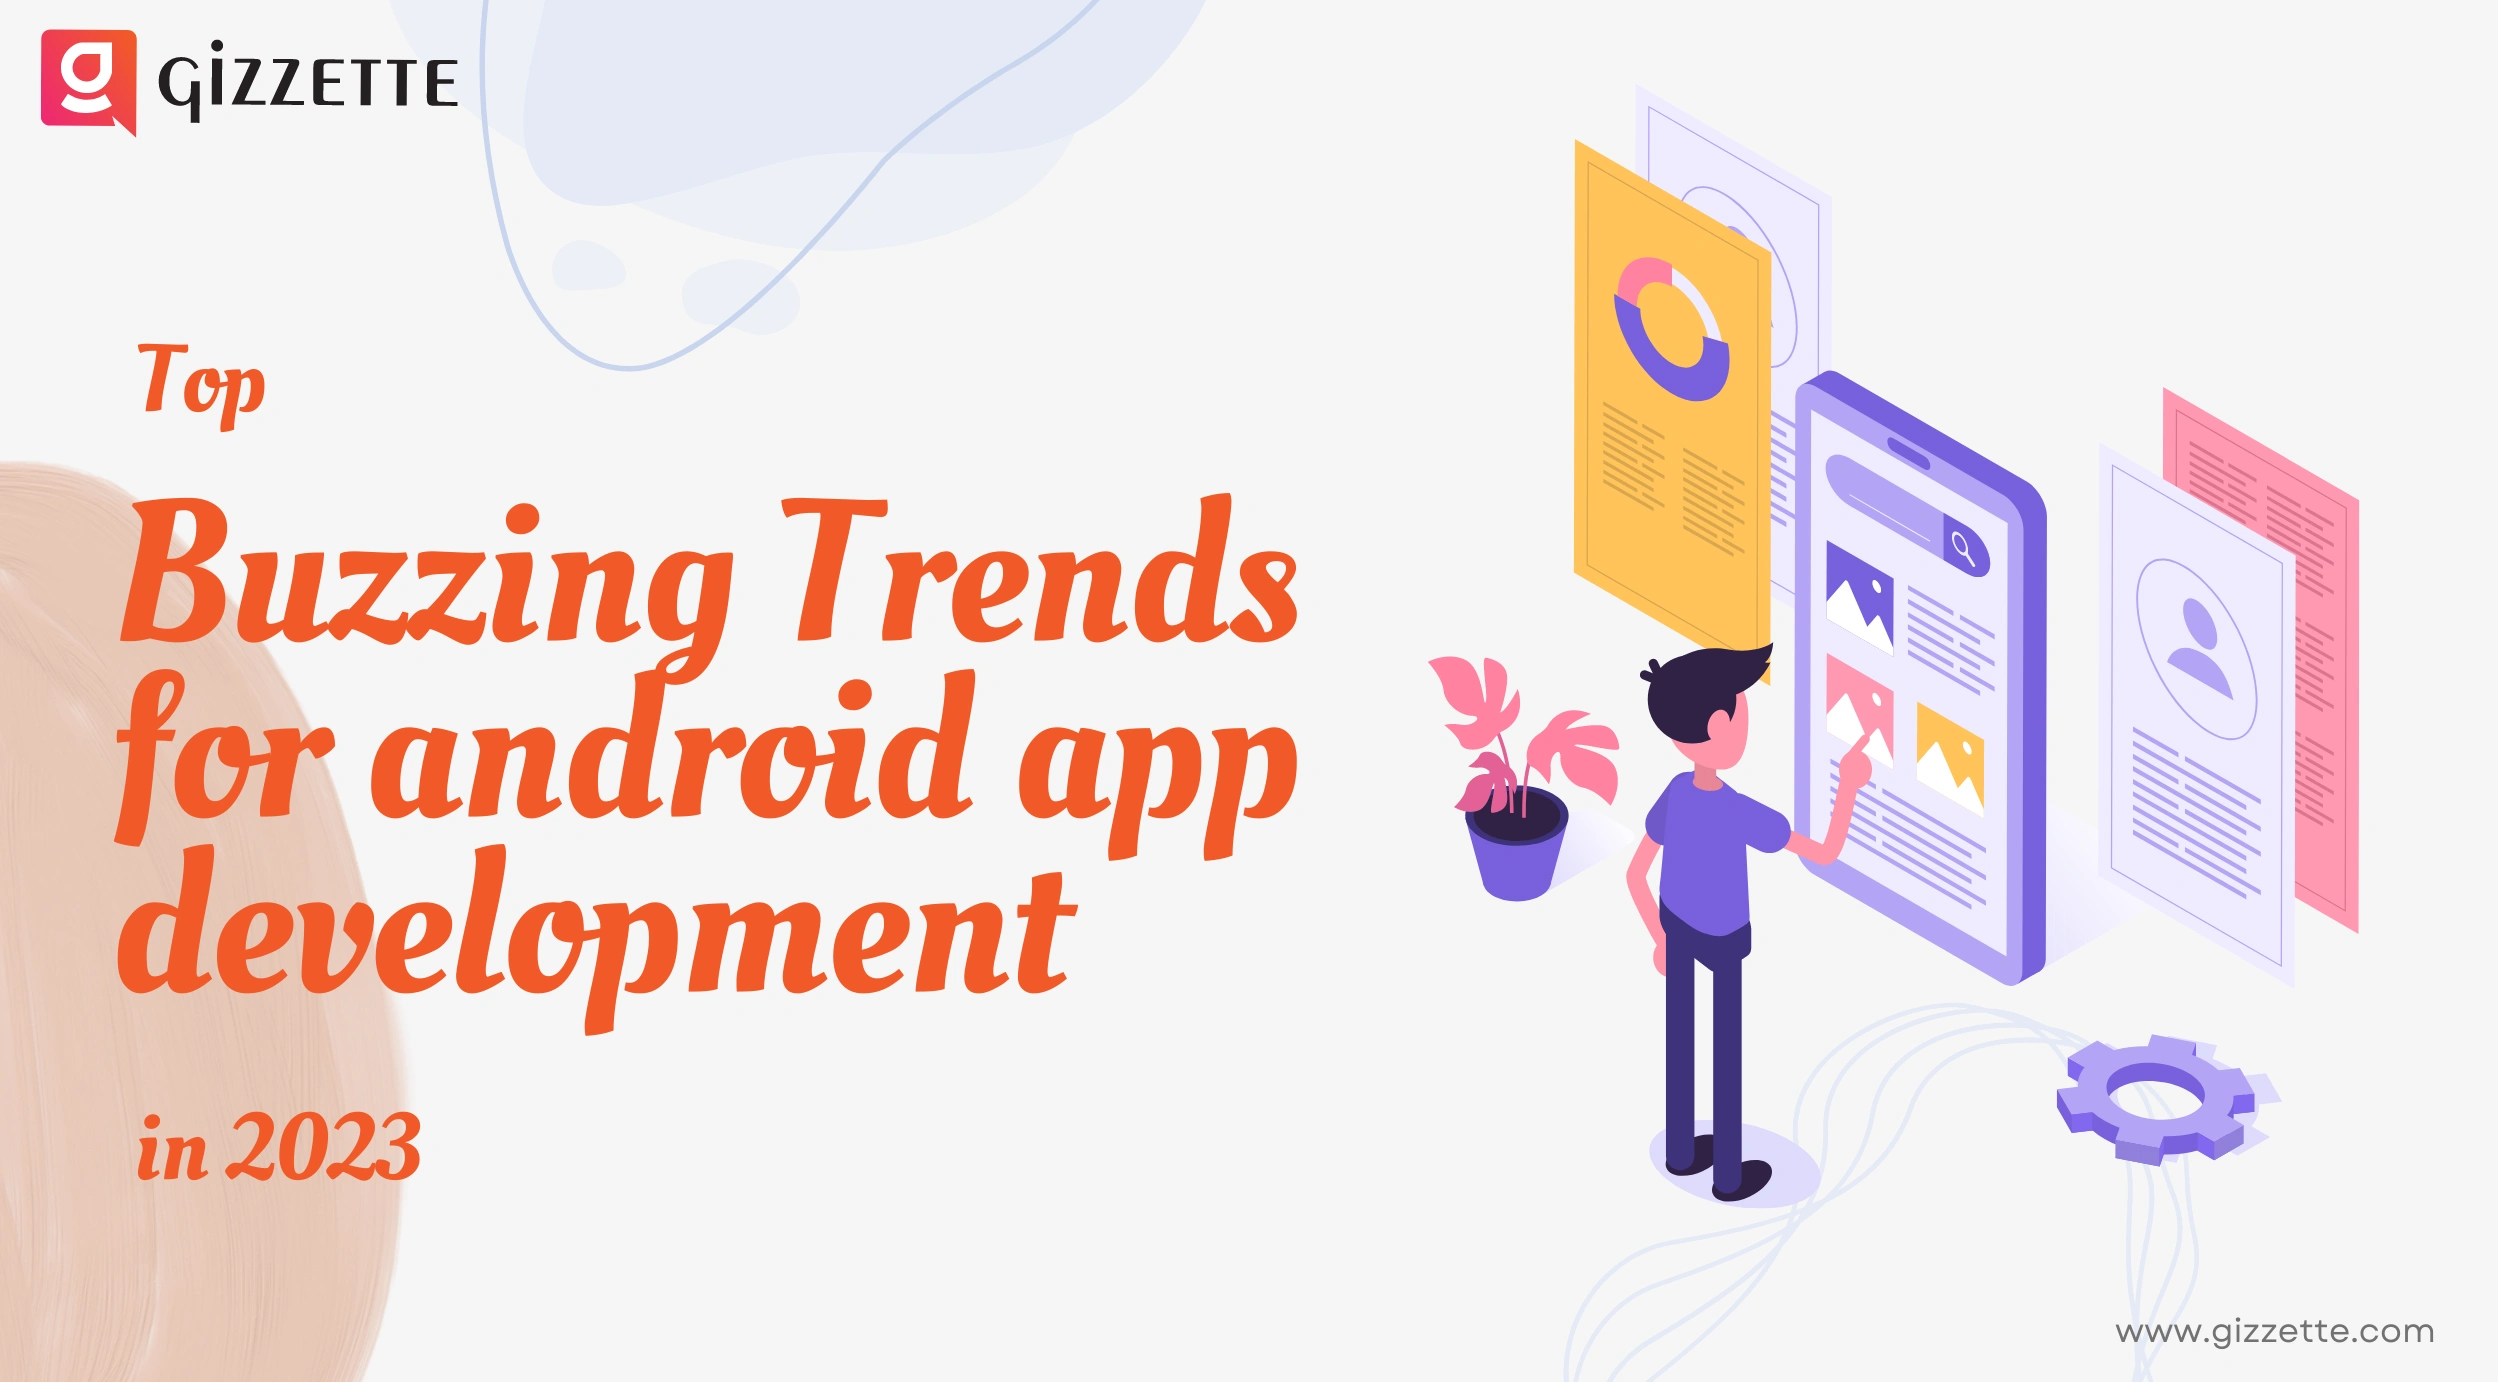 Top buzzing 2023 trends for Android App Development